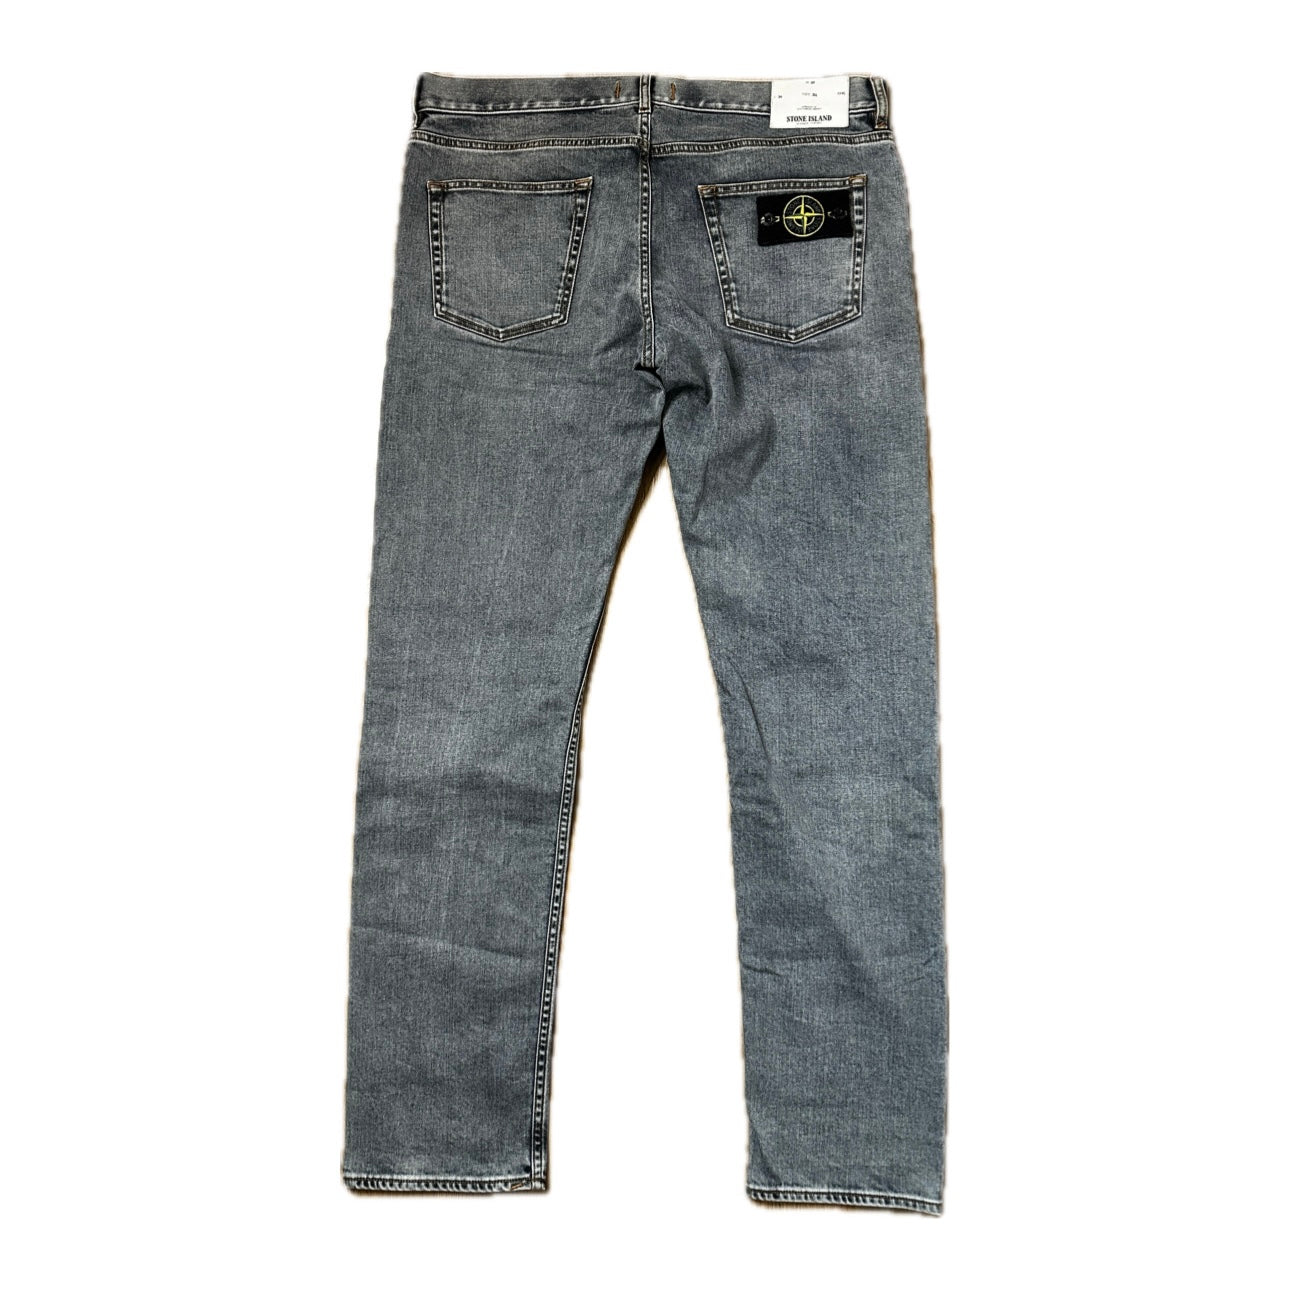 Stone Island 2015 Jeans - 38/34 - Made in Italy